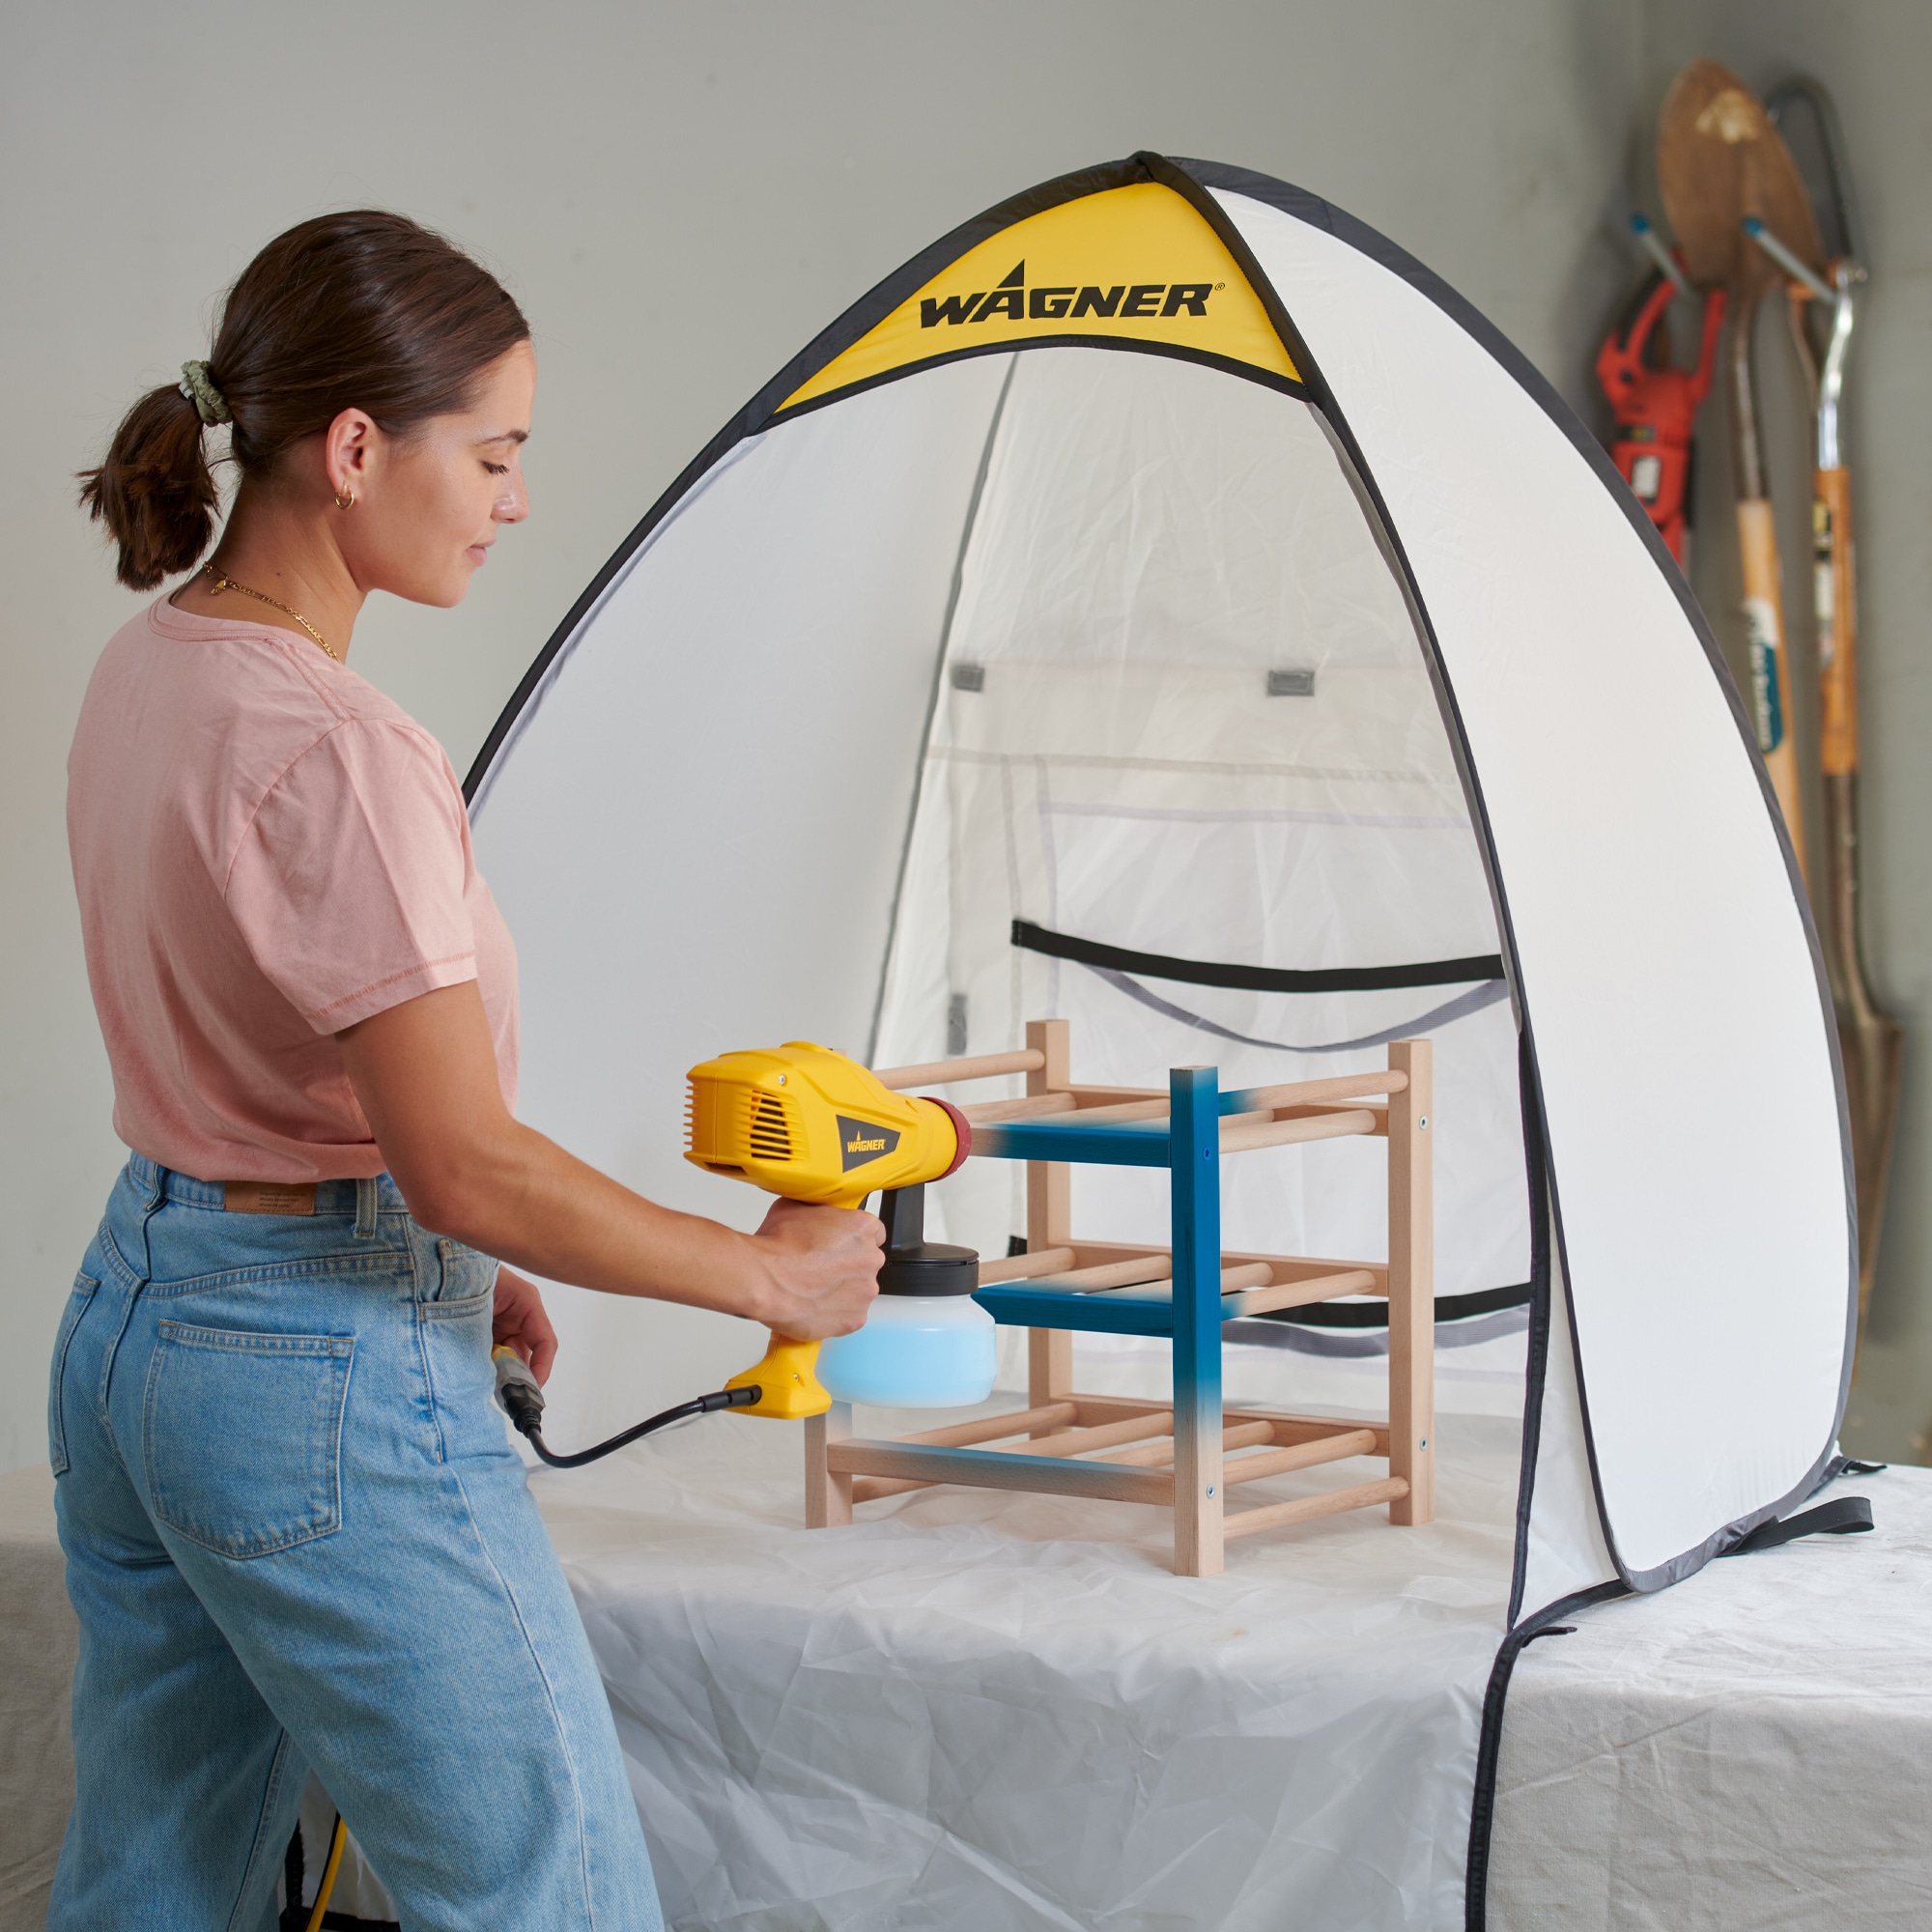 Wagner Small Spray Shelter: How to Fold 